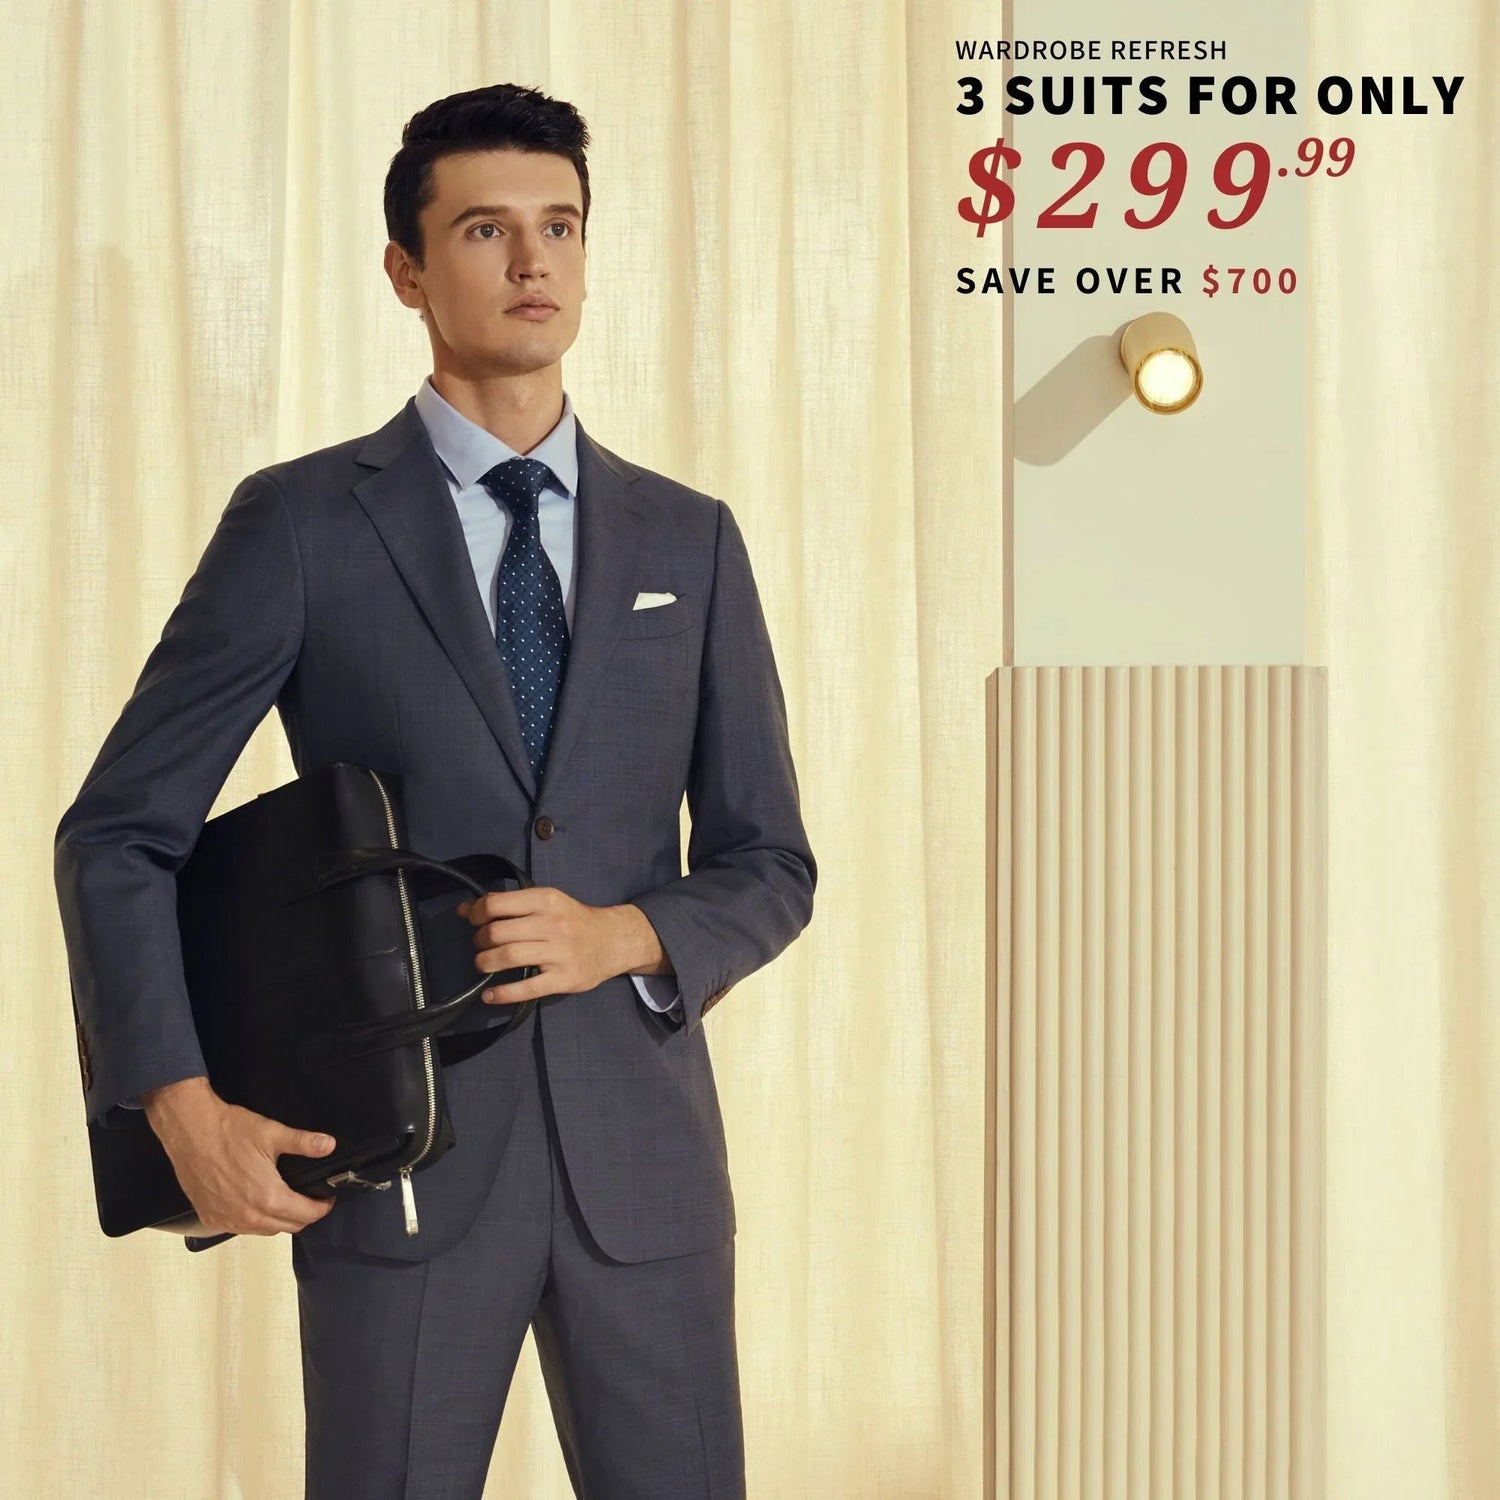 An impeccably dressed man, donning a tailored suit from BYOB, confidently clutches a sleek briefcase.